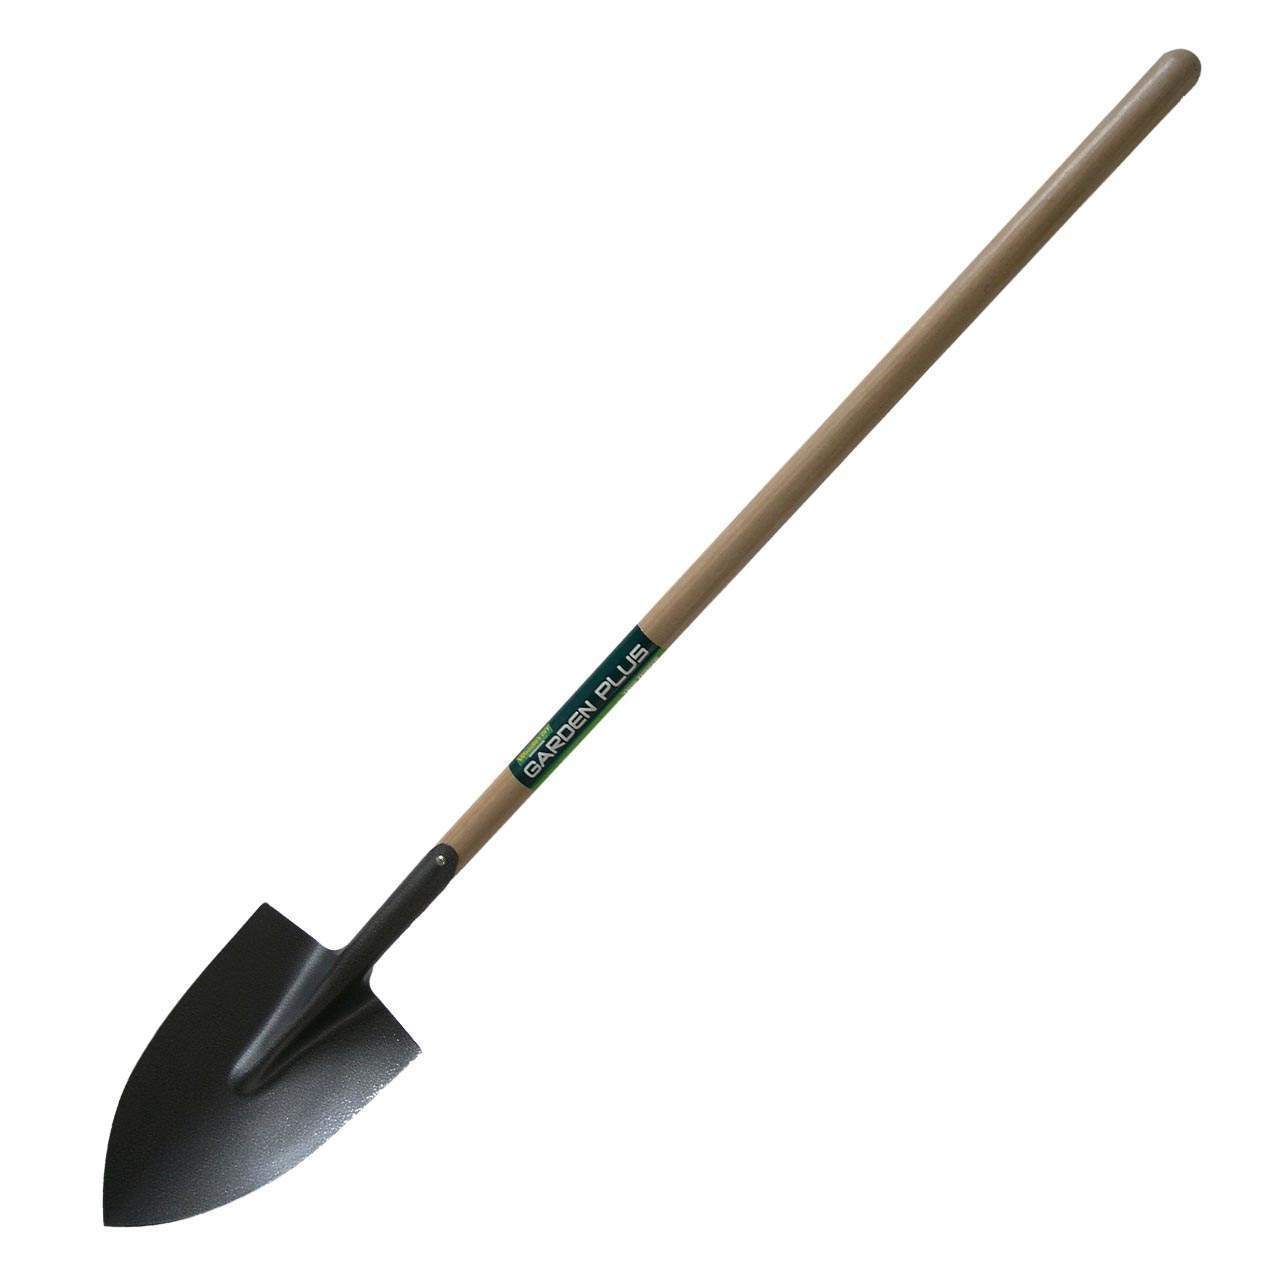 Shop Online for a Great Range of Spades and Shovels a at Woodie's